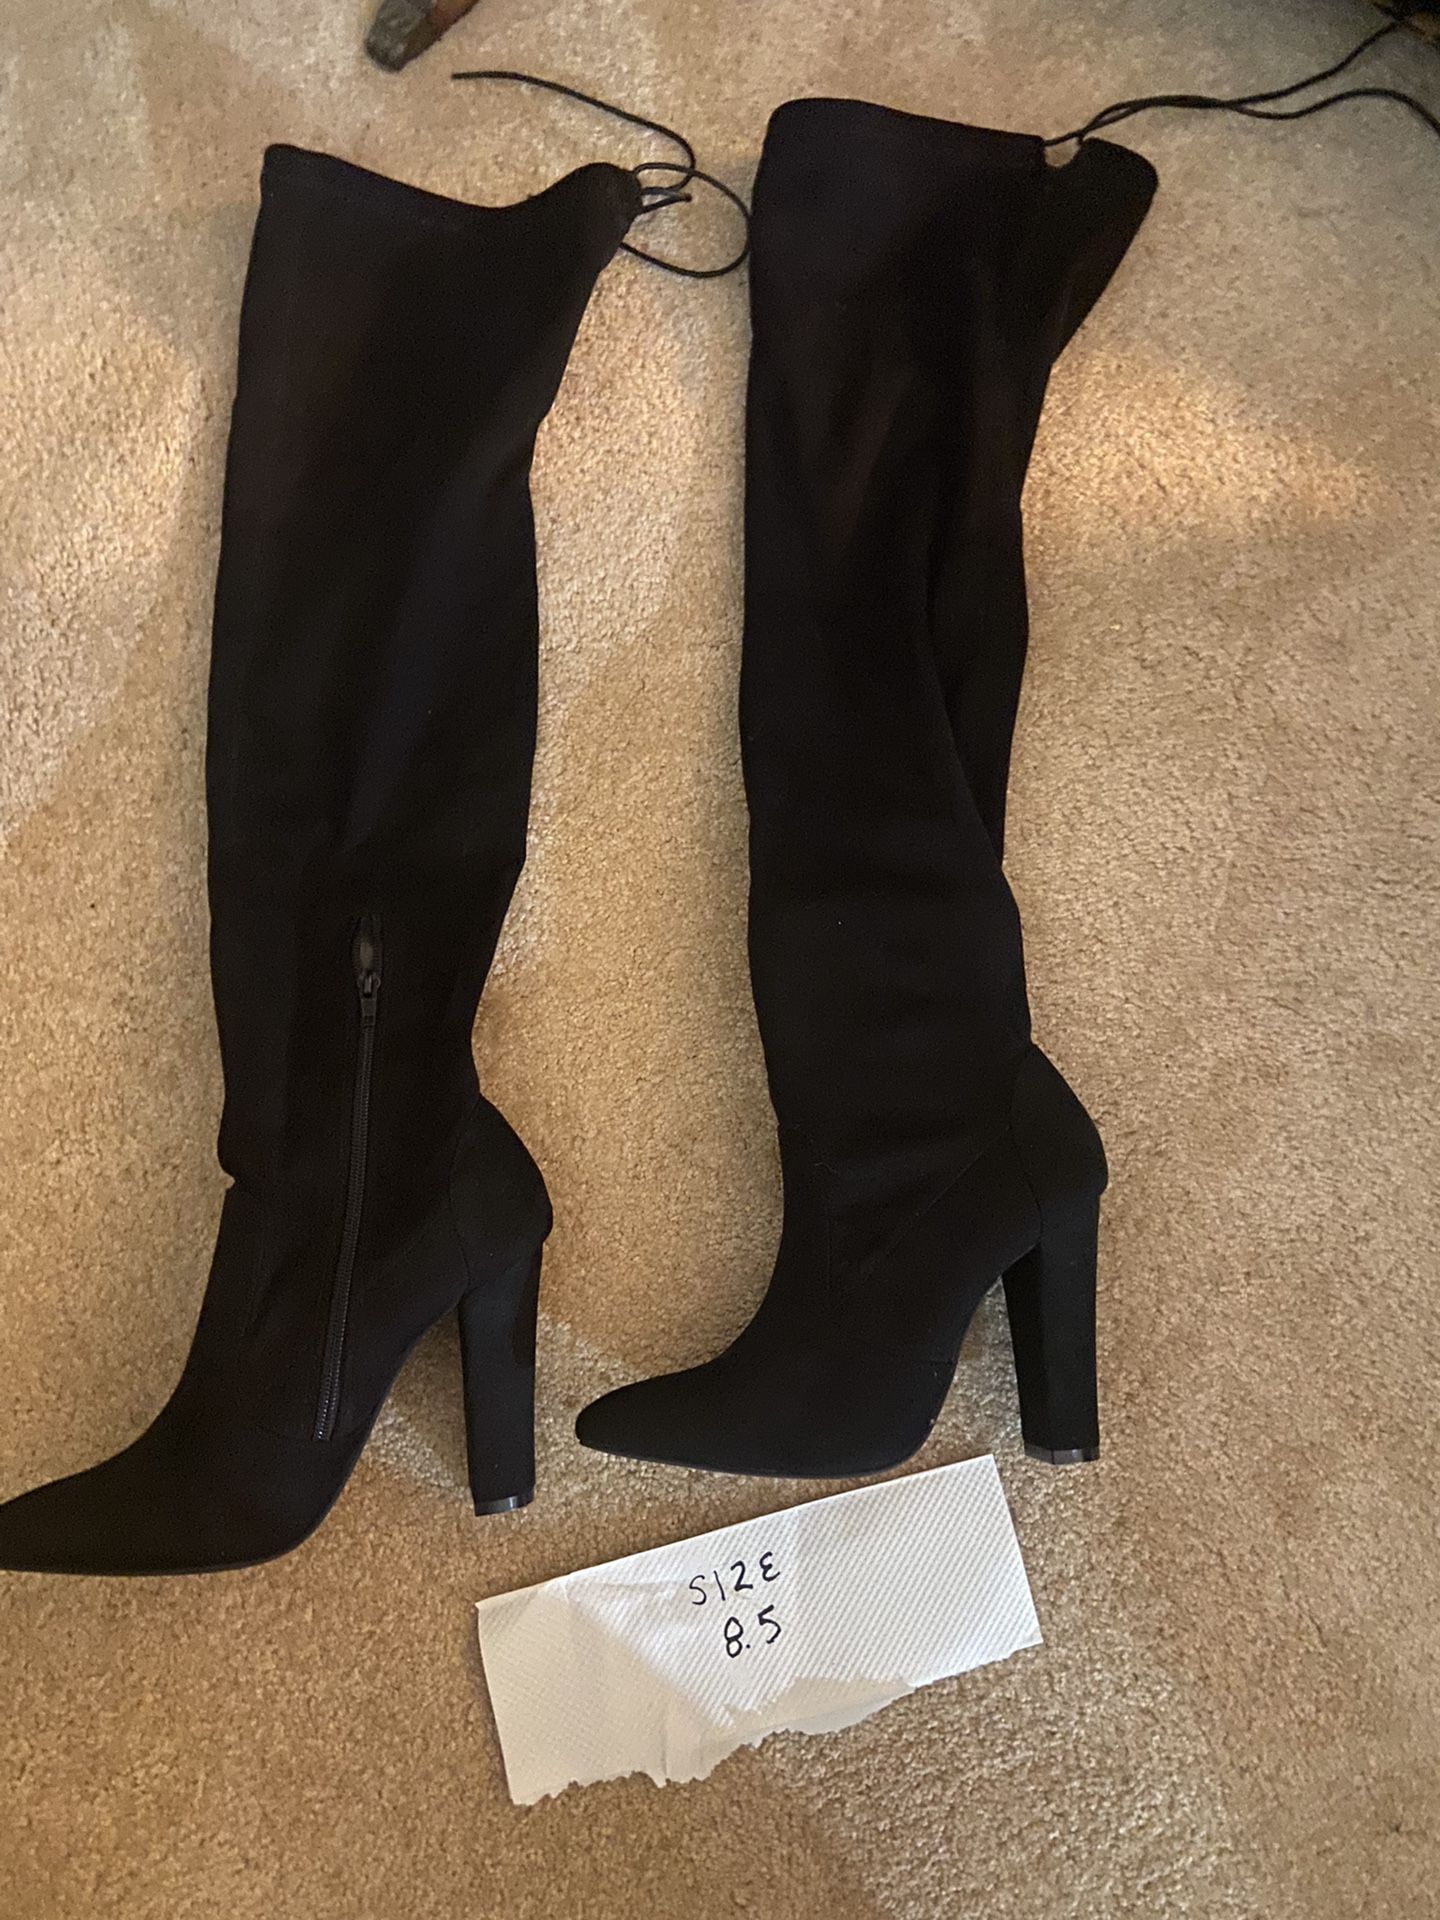 BOOTS!! Thigh Highs Size 8.5